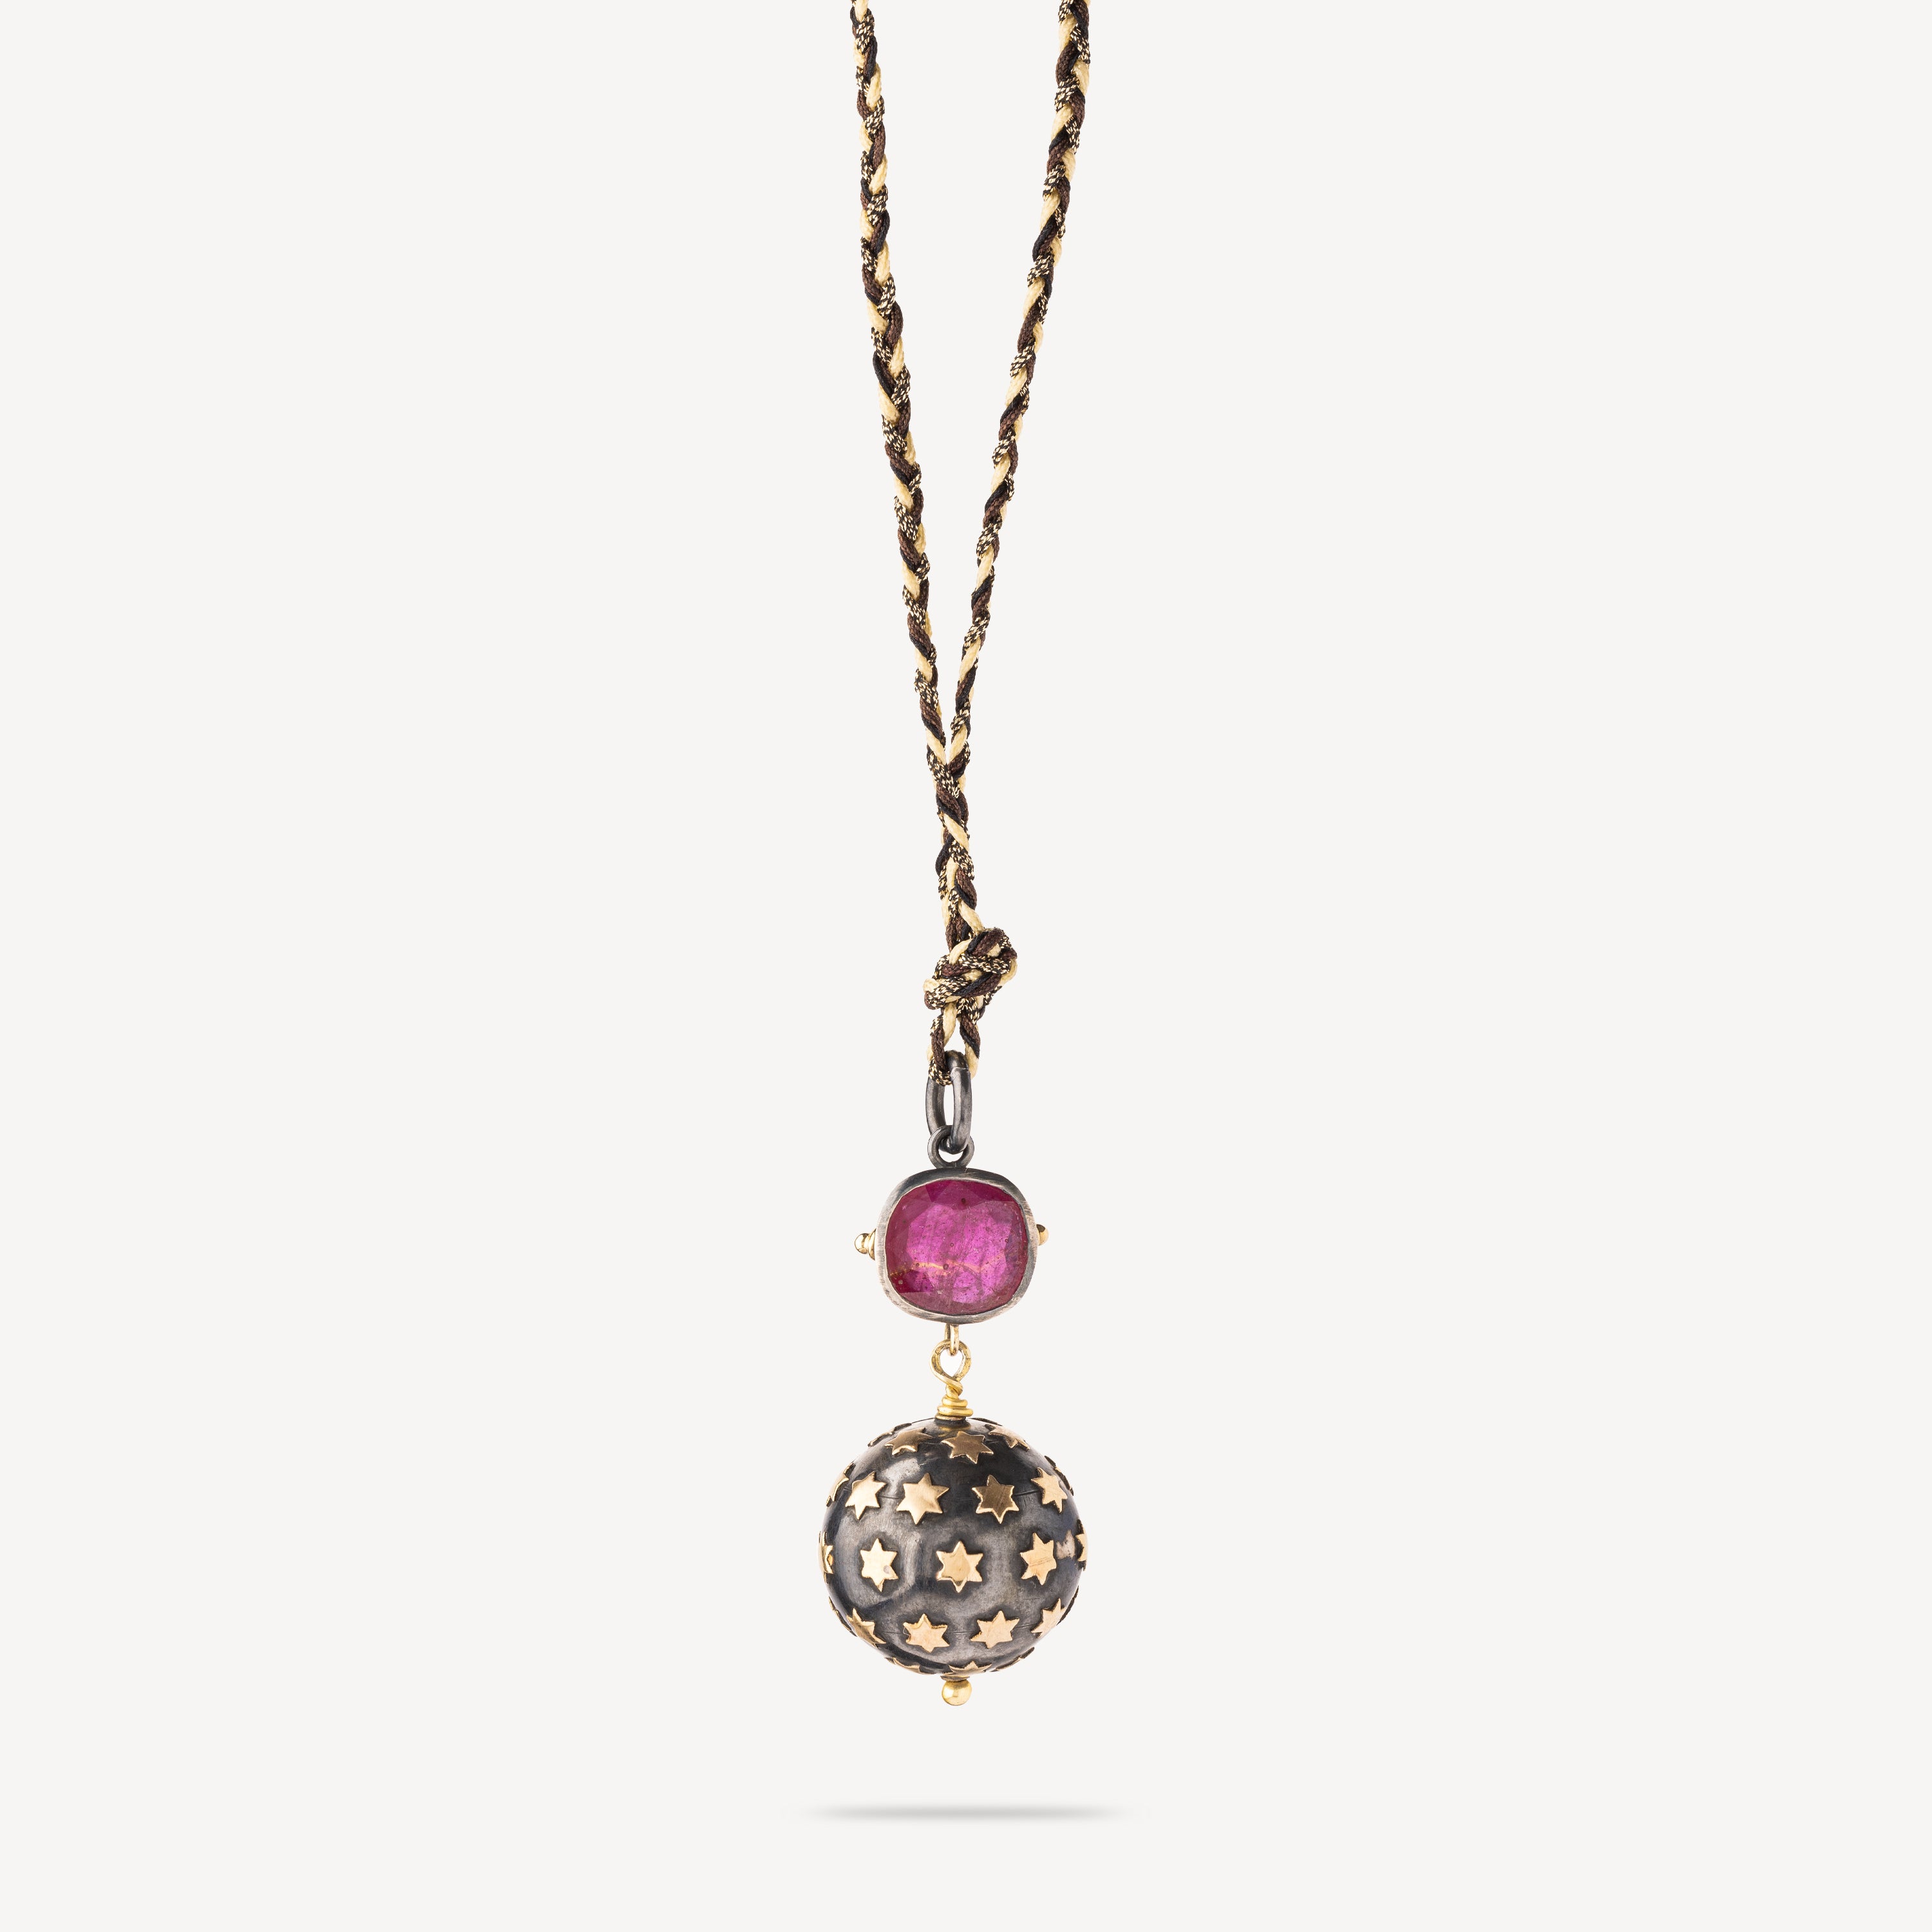 Ruby star necklace